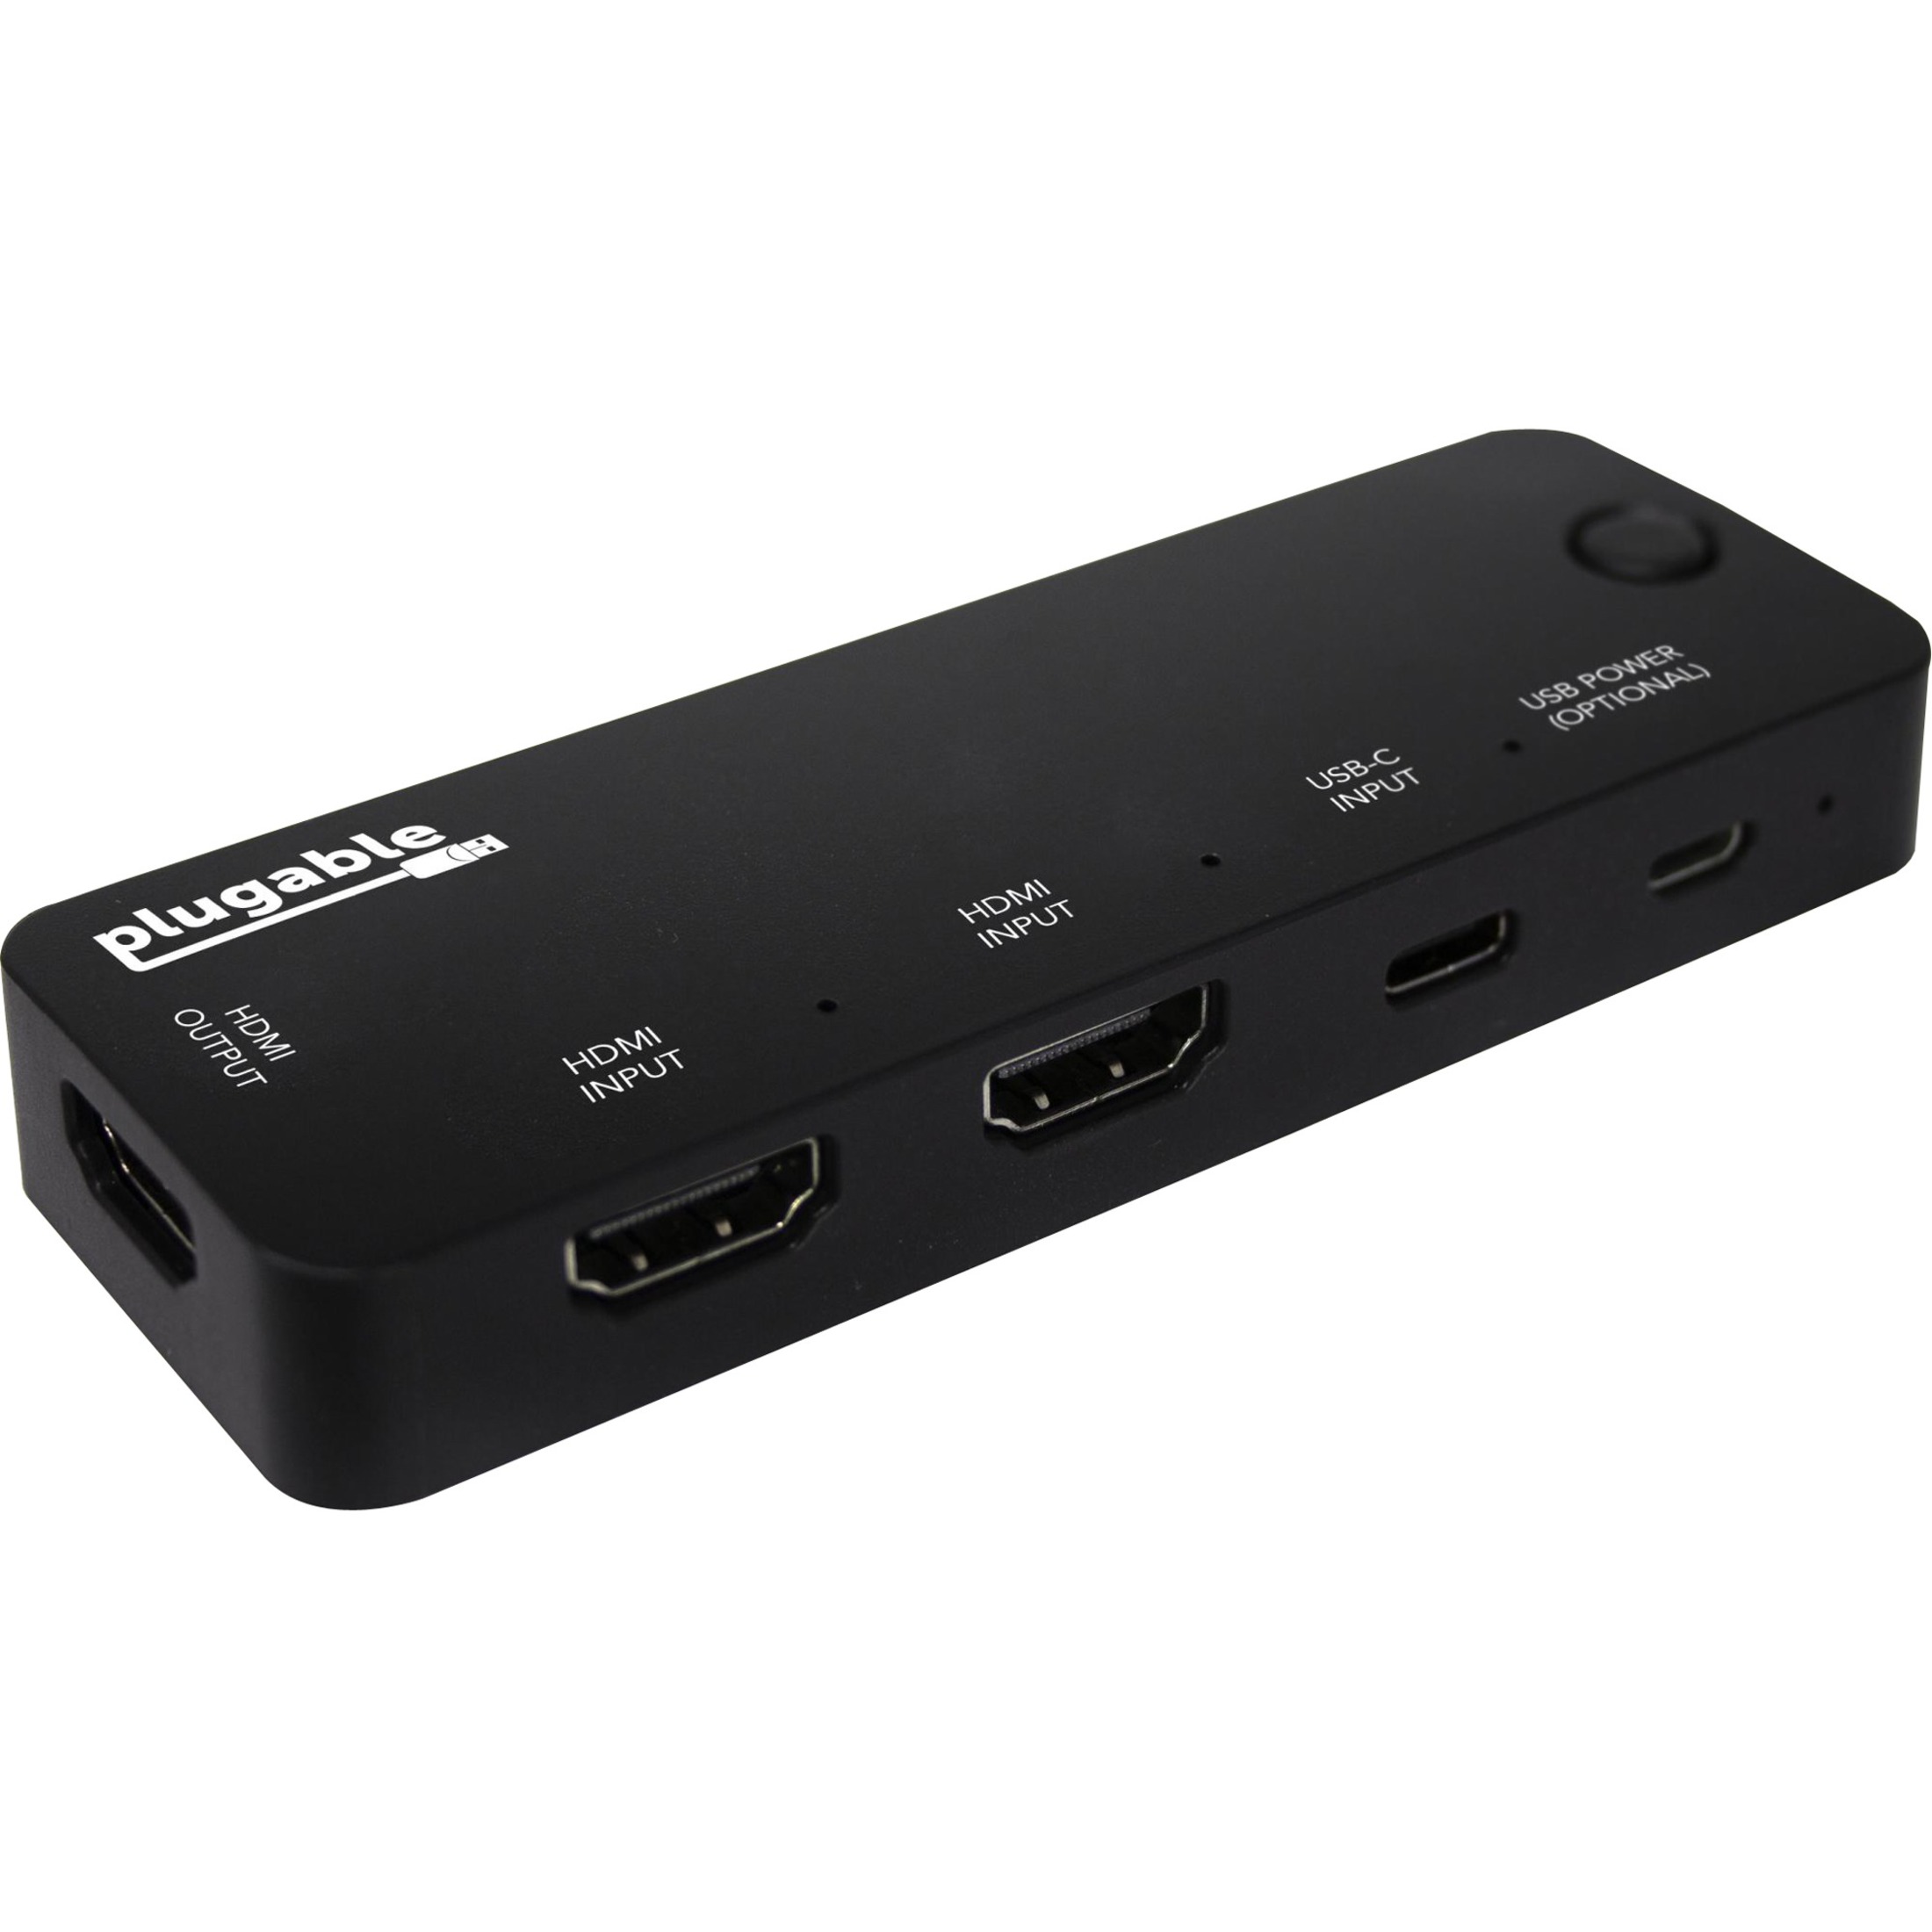 Plugable HDMI Switch with USB-C Input (Supports 2x HDMI 2.0 4K@60Hz Sources and 1x USB C or Thunderbolt 3 Source) - image 1 of 9